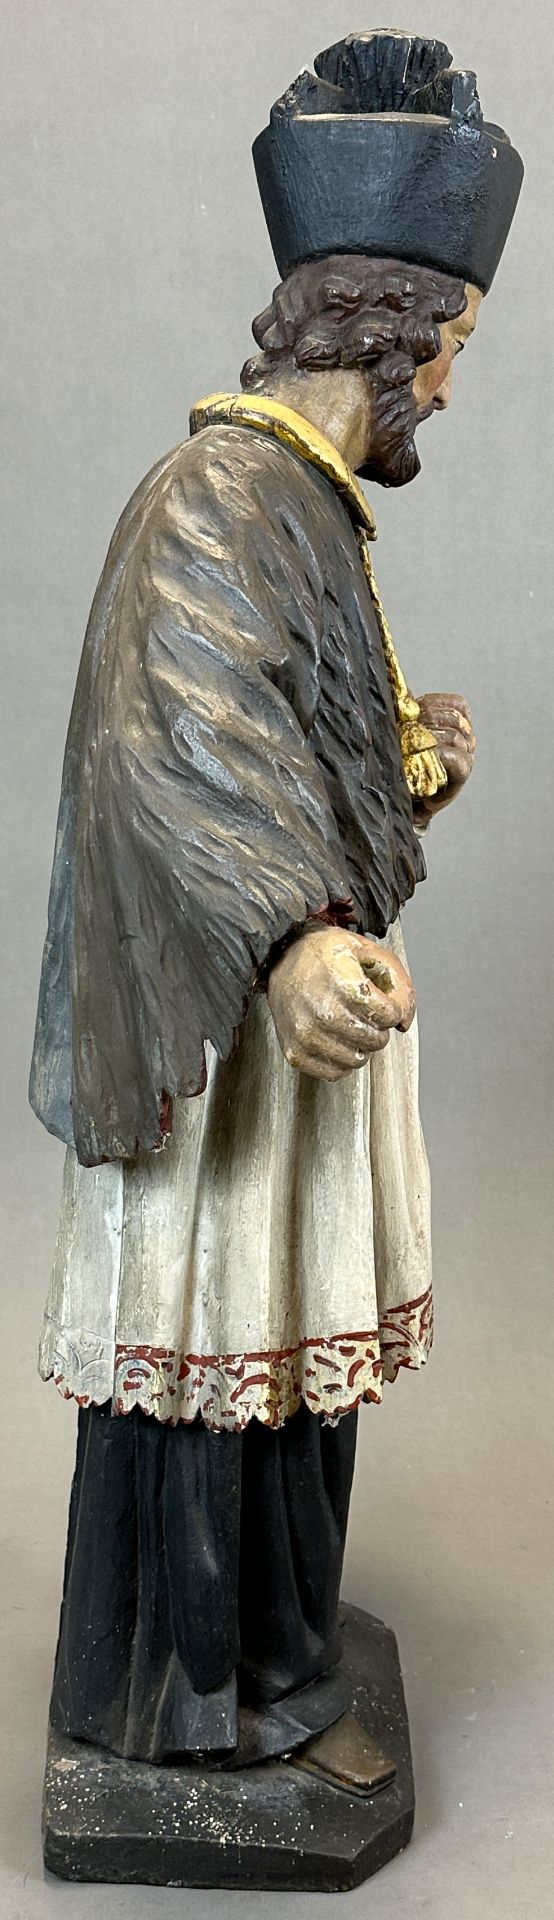 Wooden figure. Nepomuk without attributes. 19th century. Germany. - Image 4 of 14